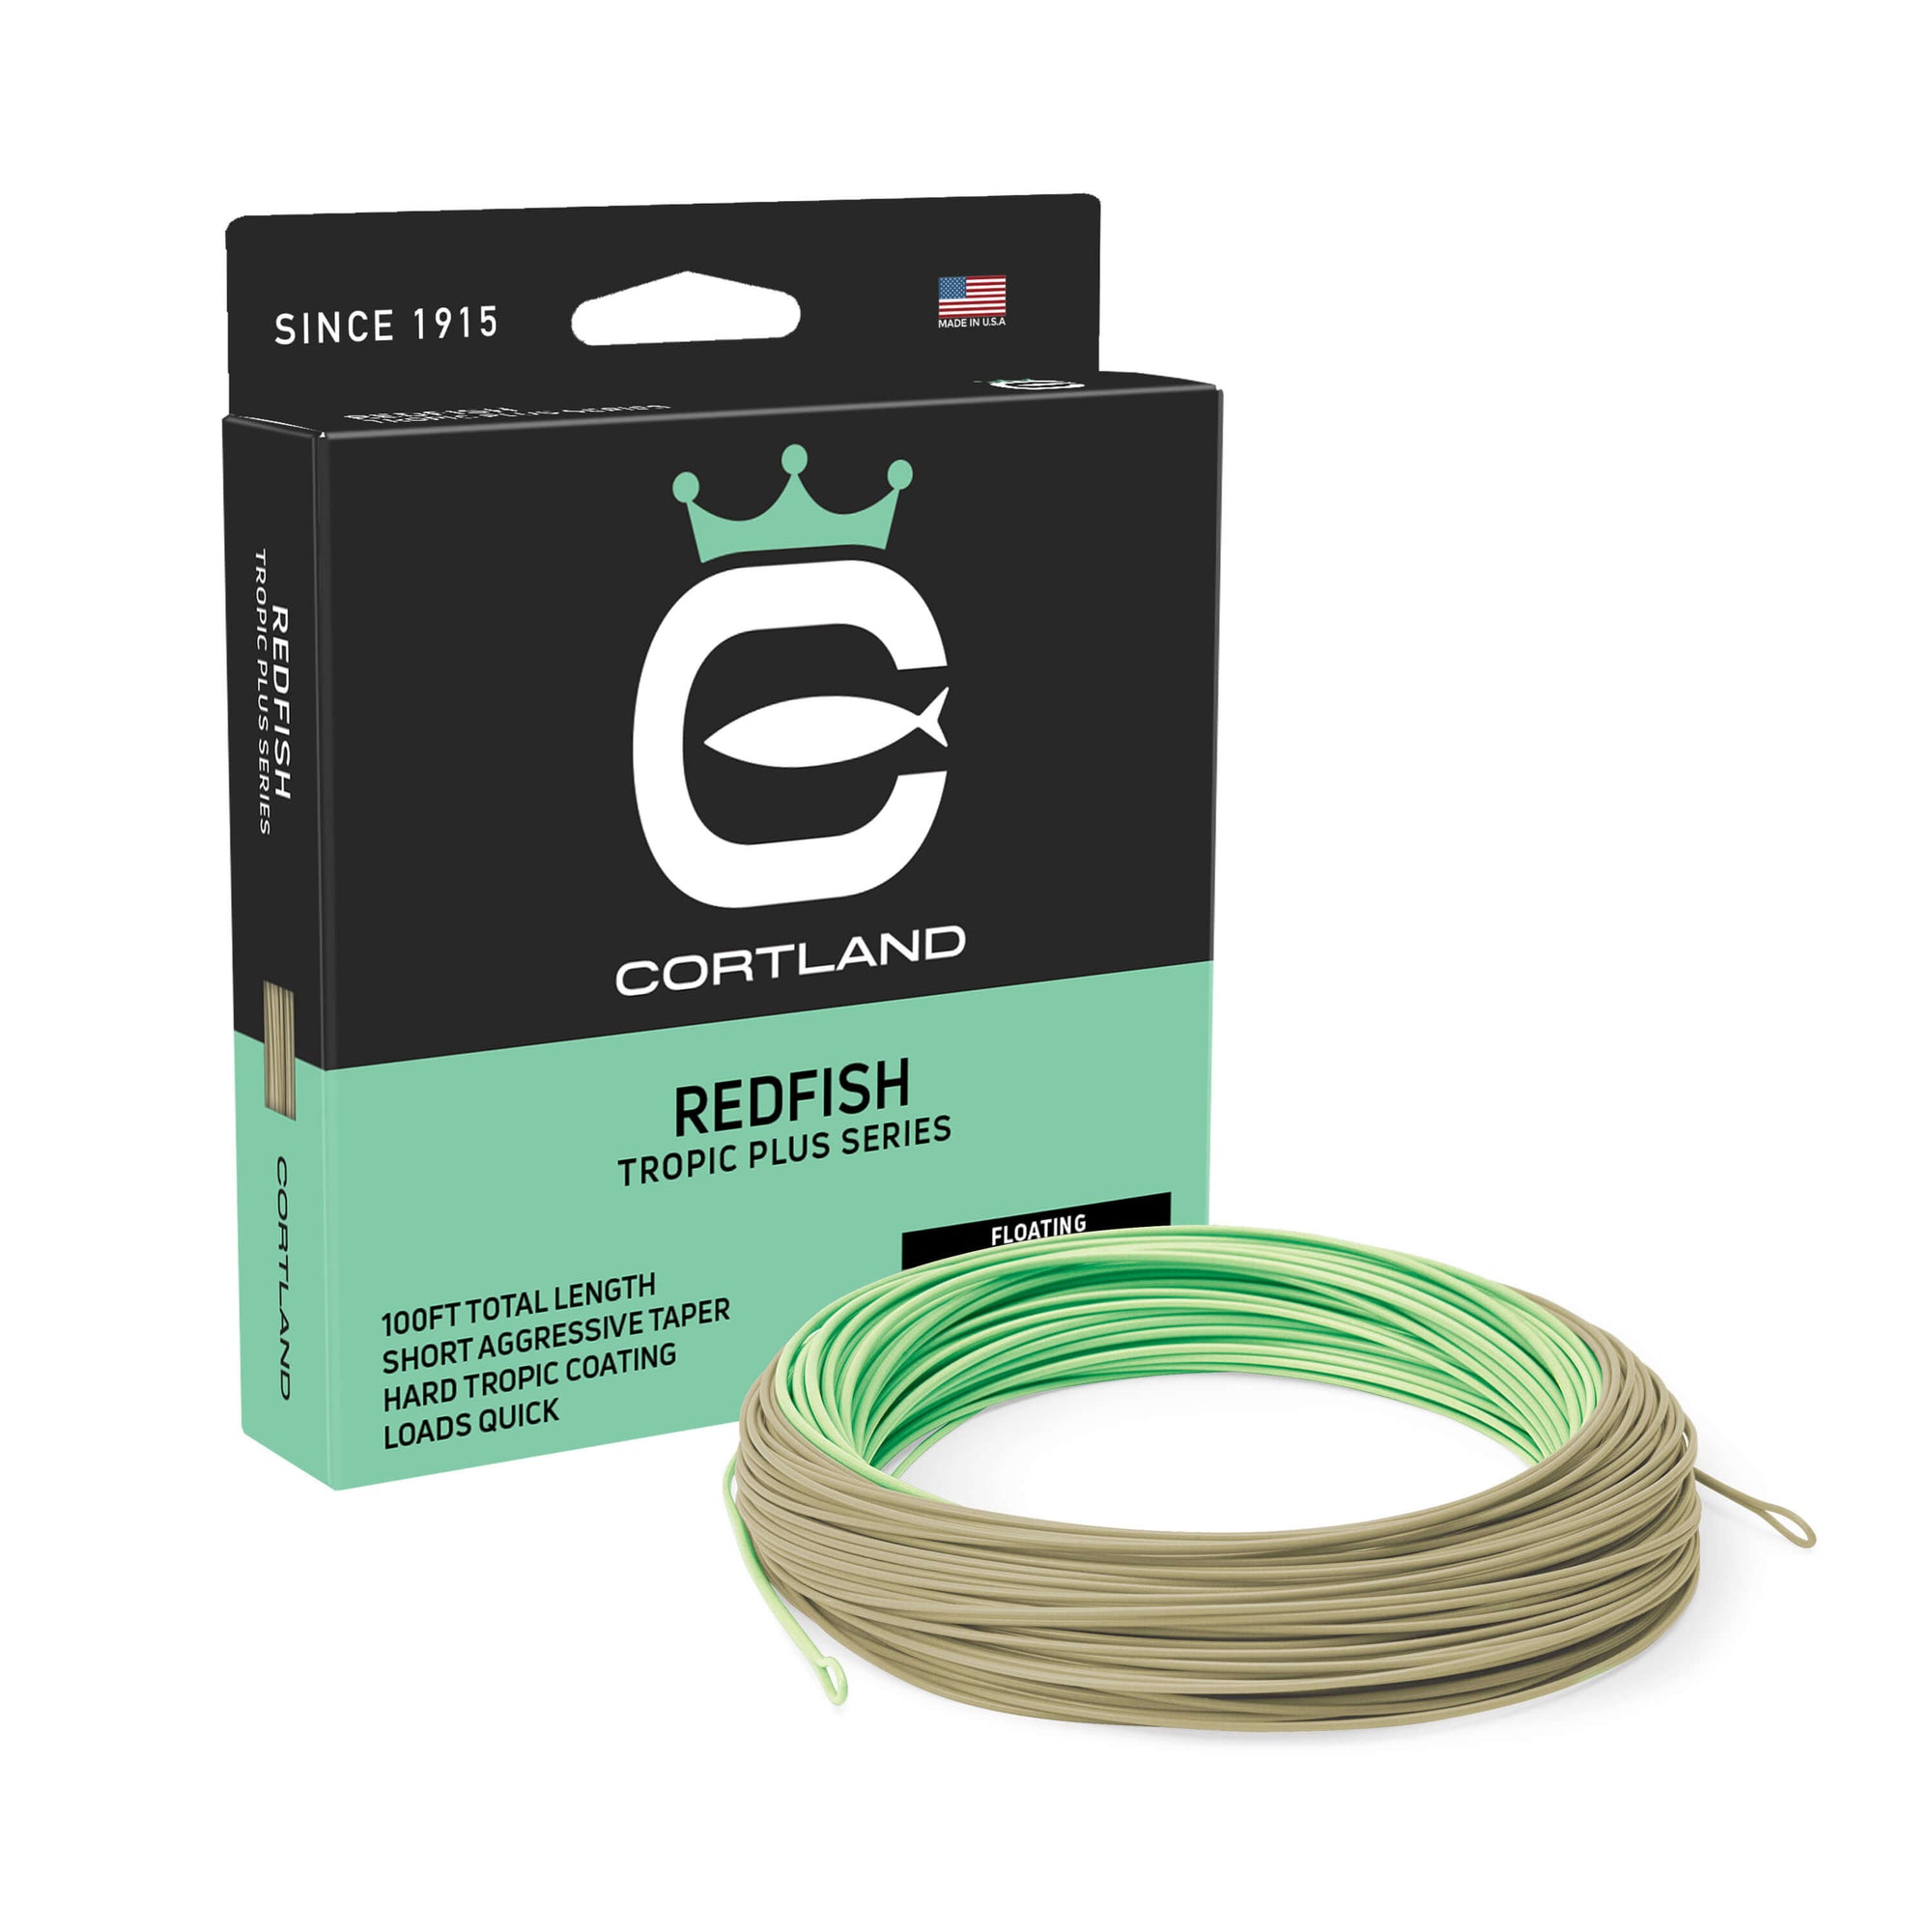 Redfish Fly Line Box and Coil. The coil is seafoam green and tan. The box is black at the top and light blue at the bottom. 